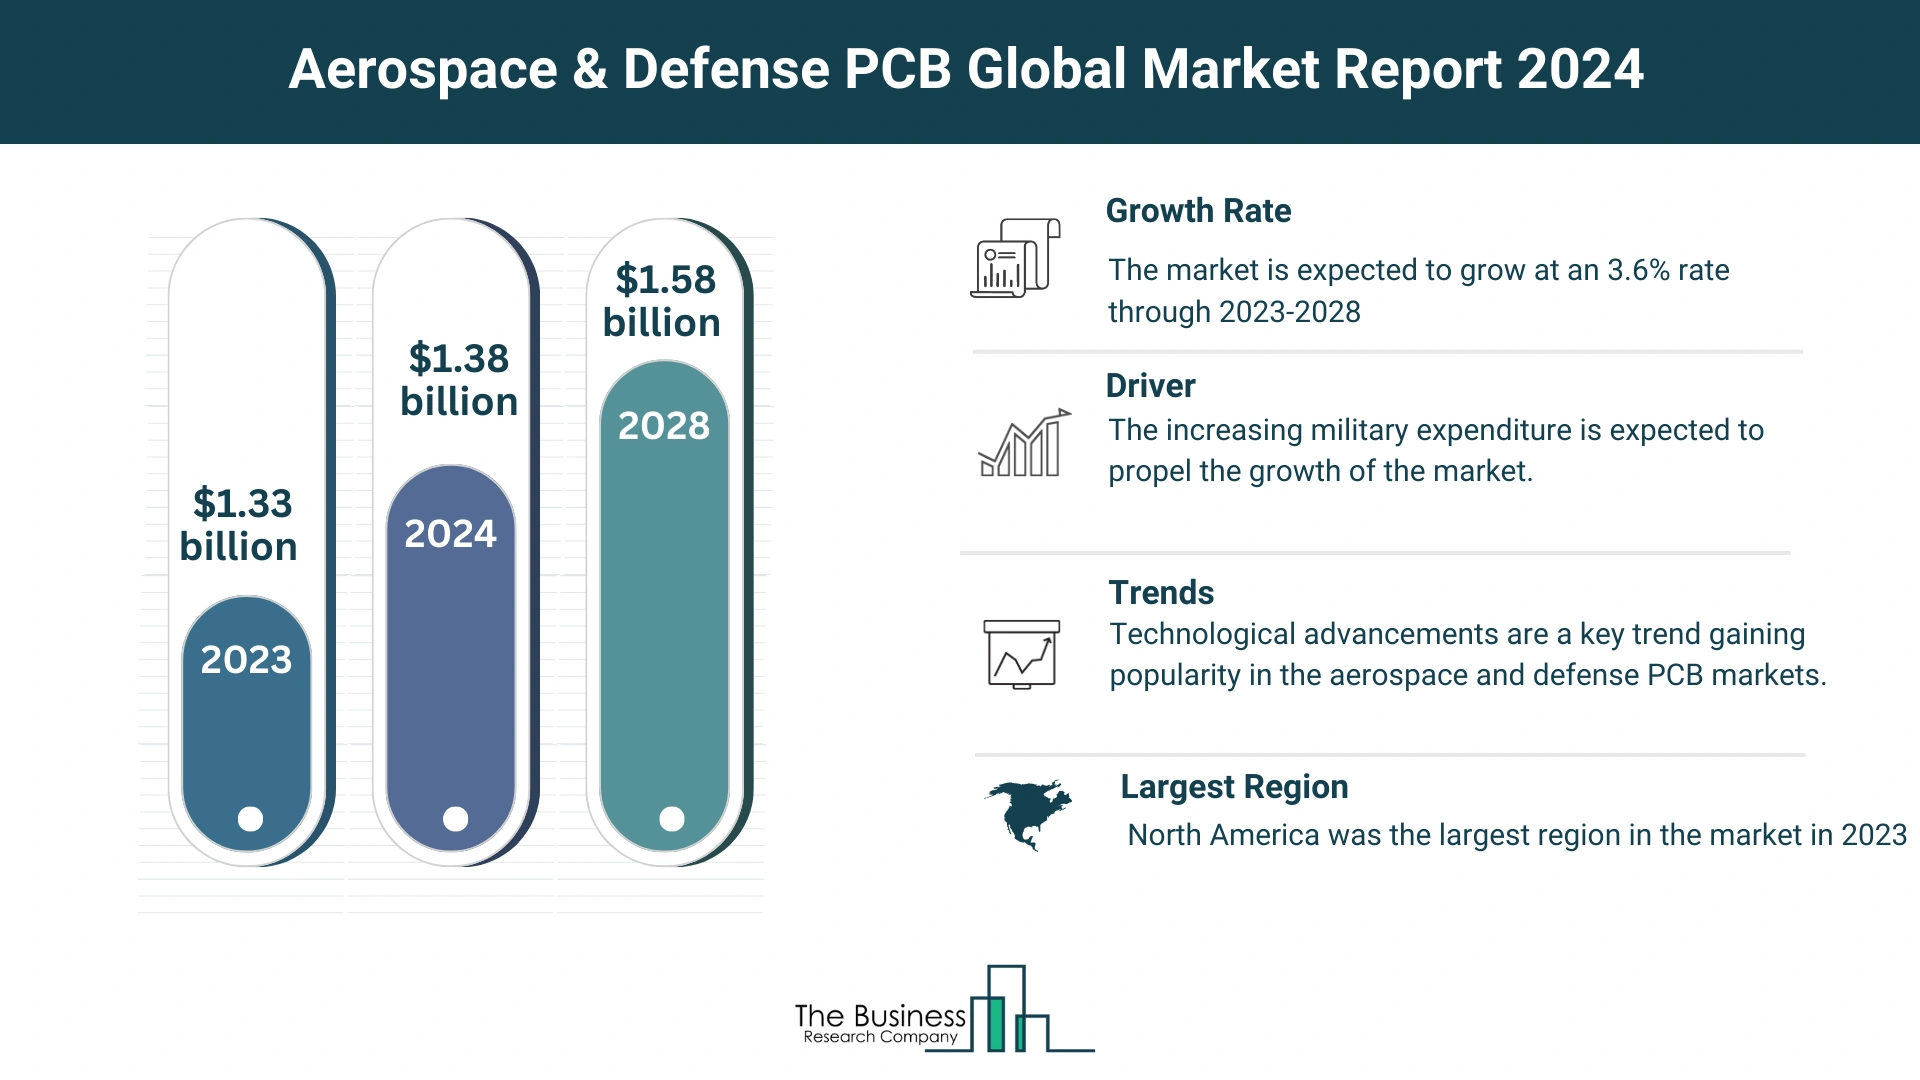 How Will The Aerospace & Defense PCB Market Expand Through 2024-2033